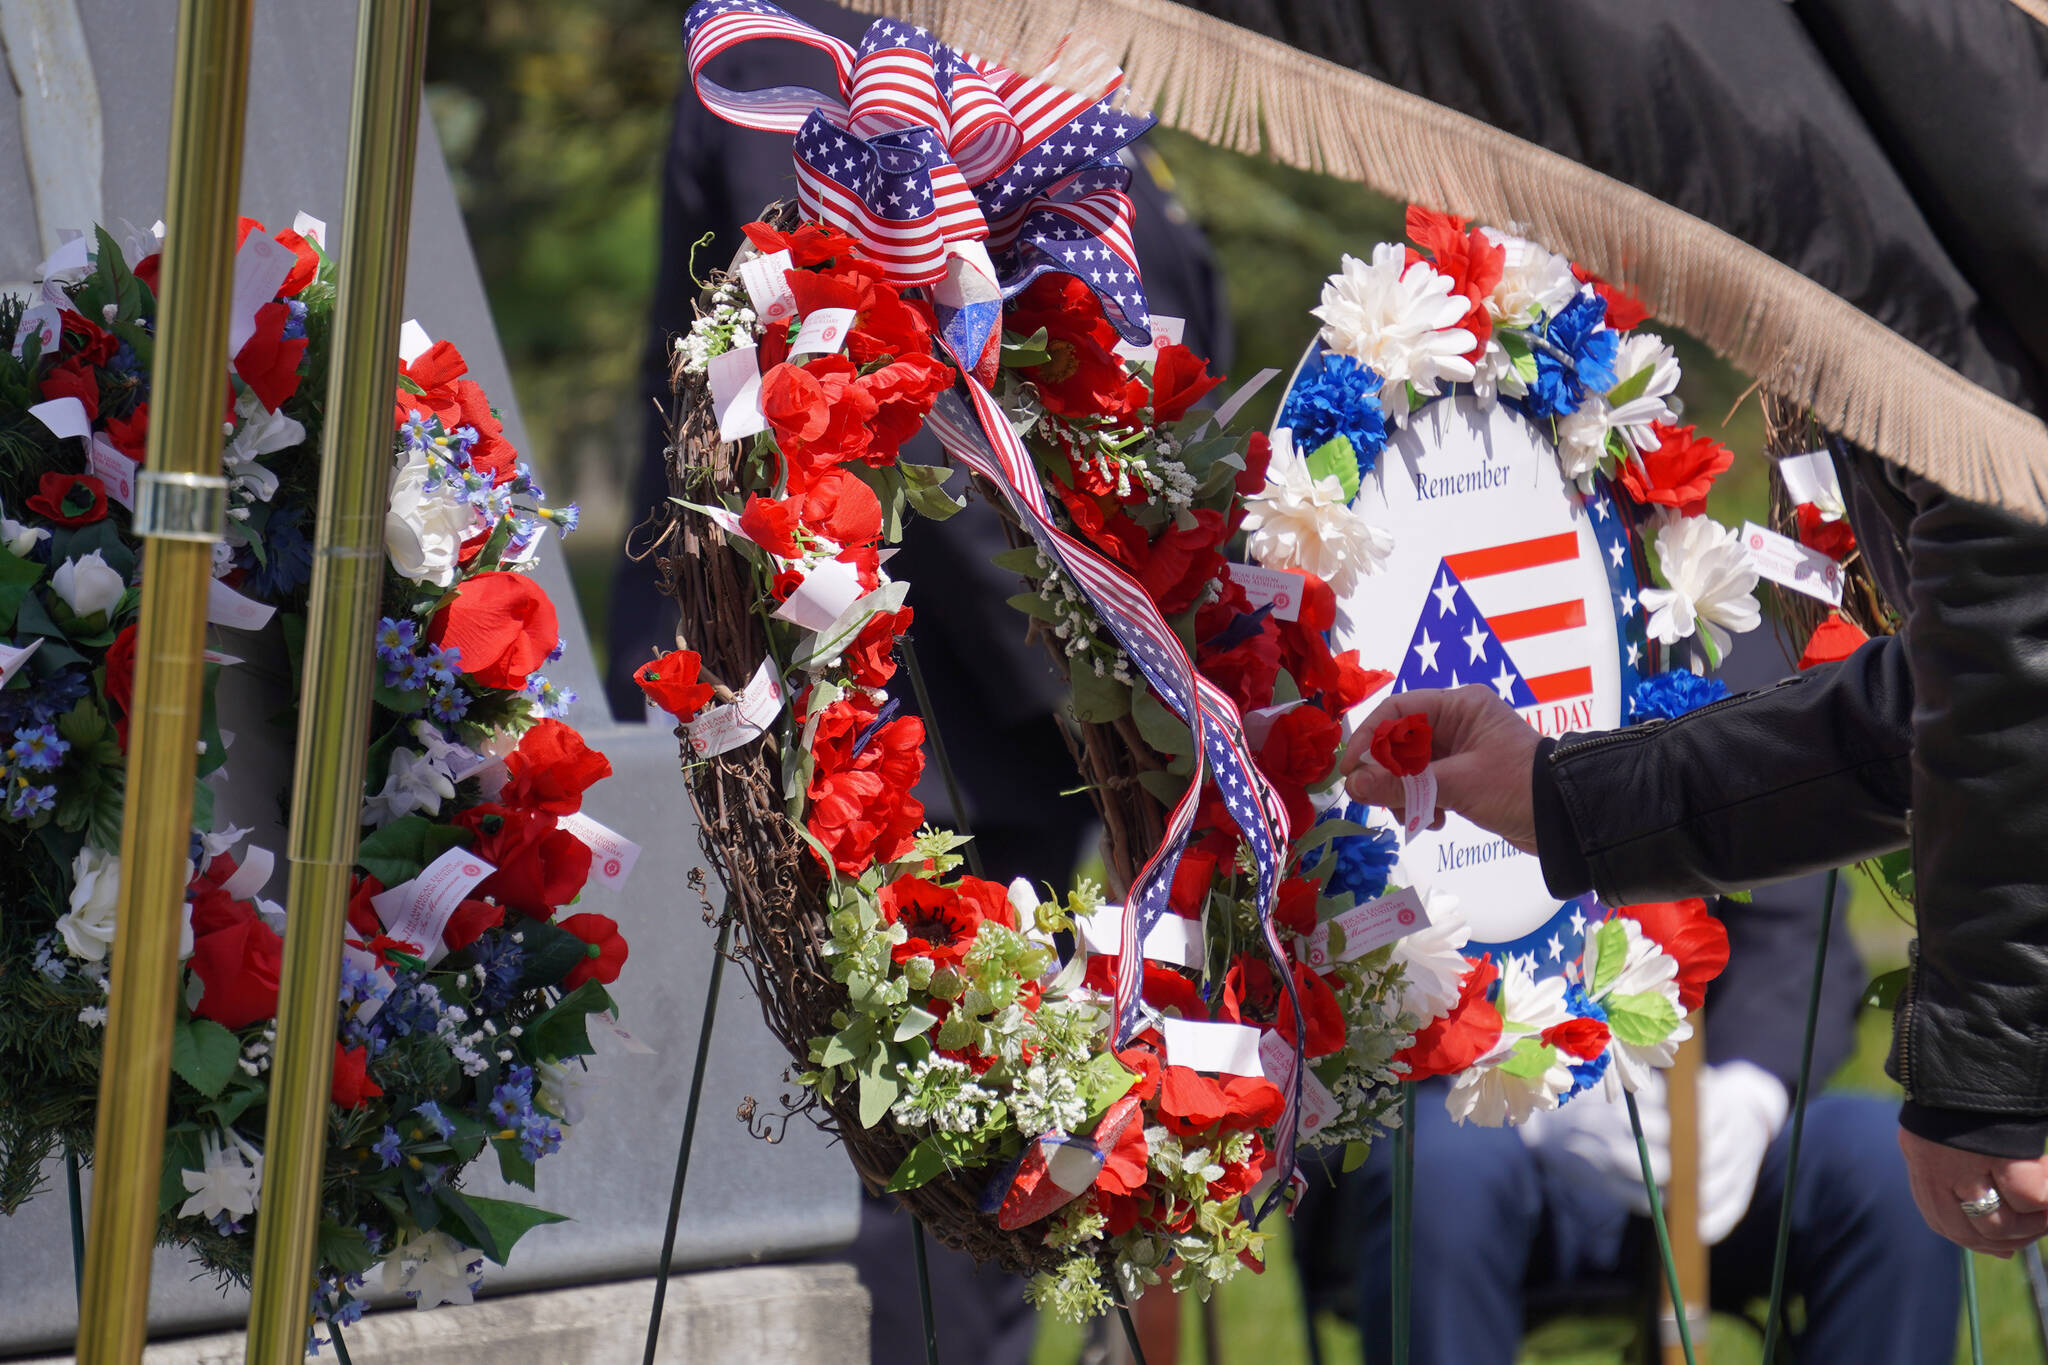 Poppies are affixed to wreaths during a Memorial Day ceremony on Monday, May 29, 2023, at Leif Hanson Memorial Park in Kenai, Alaska. (Jake Dye/Peninsula Clarion)